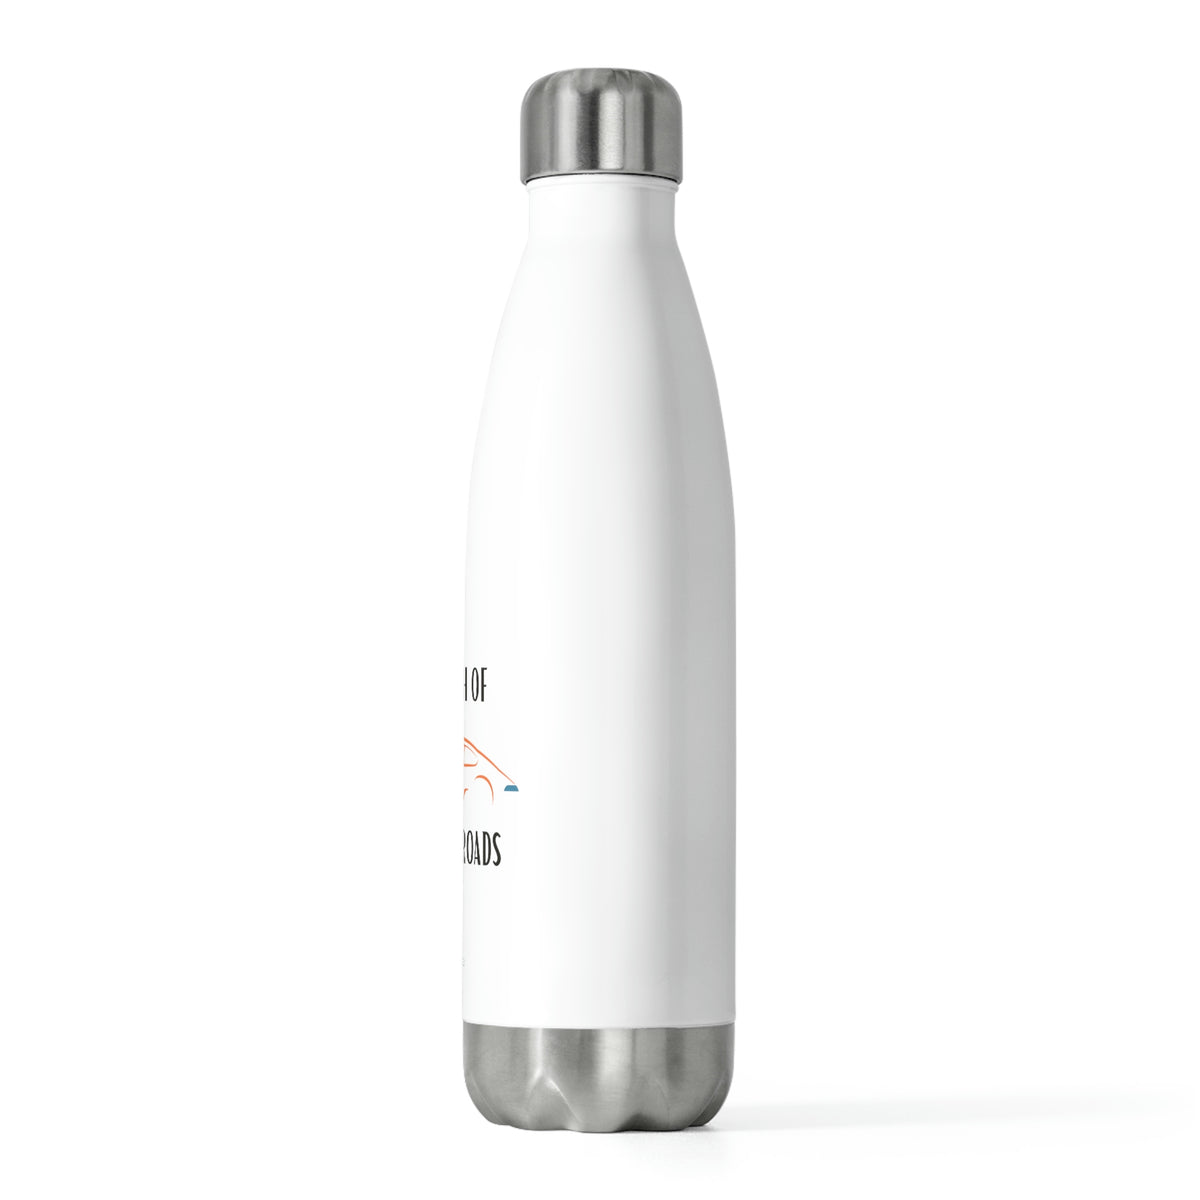 In Search of Winding Roads Insulated Bottle 20oz